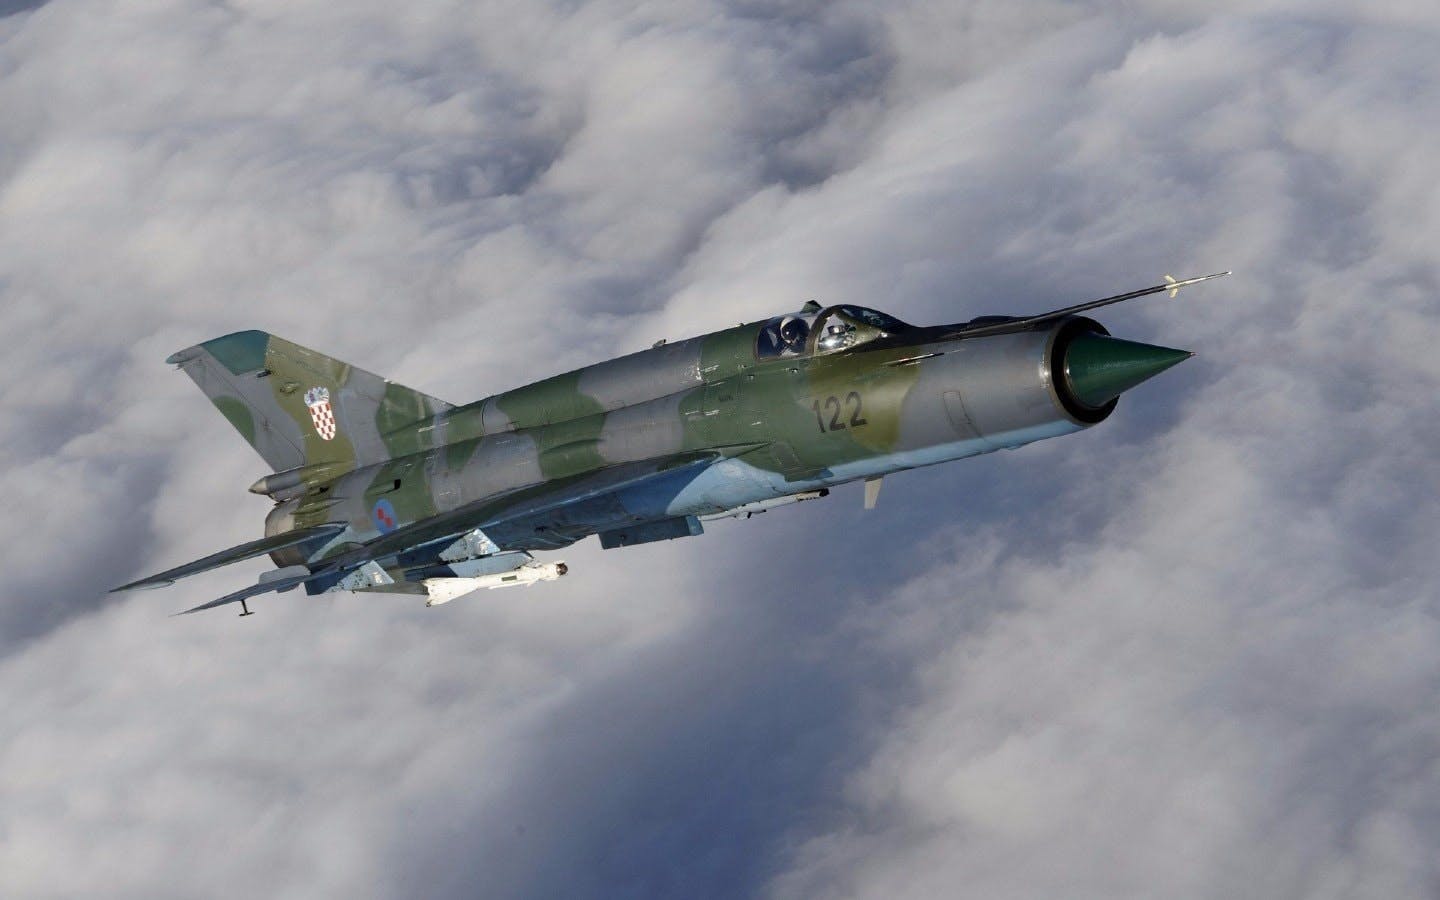 The longevity of the MiG-21: A Cold War warrior that still lives on